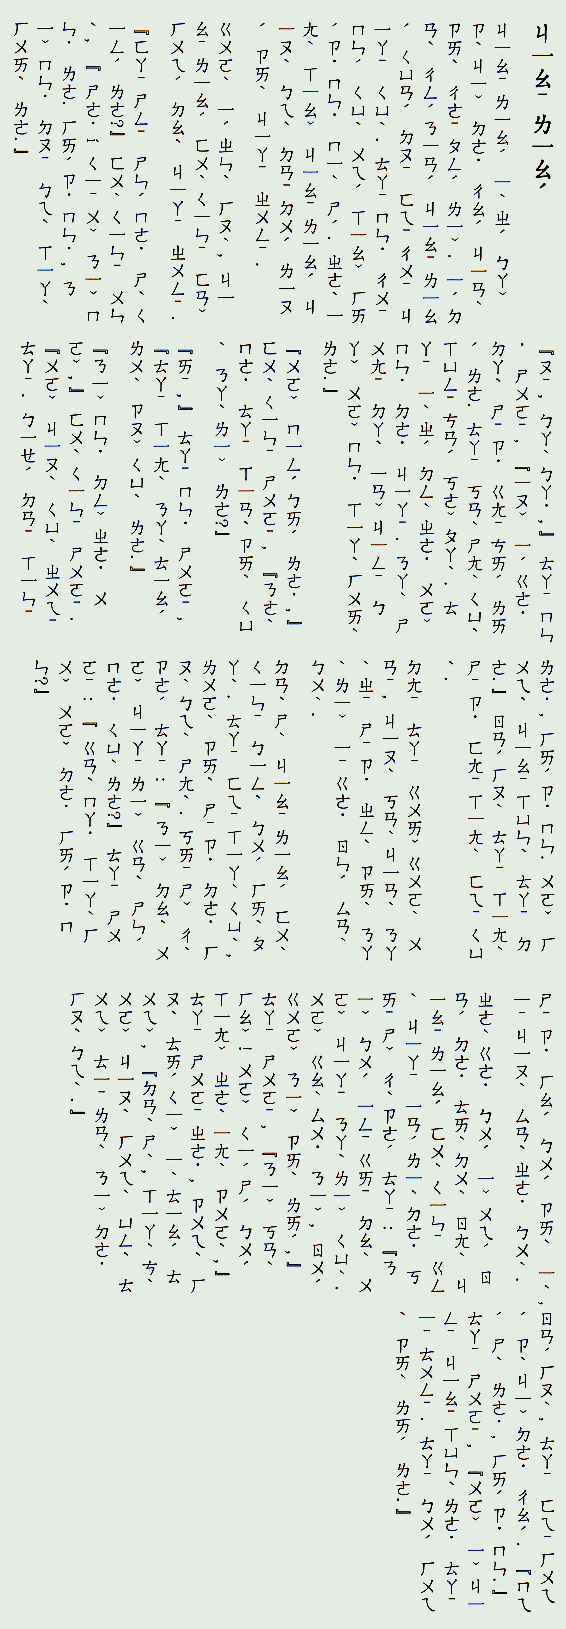 Chinese Translation in Zhuyin Fuhao Script